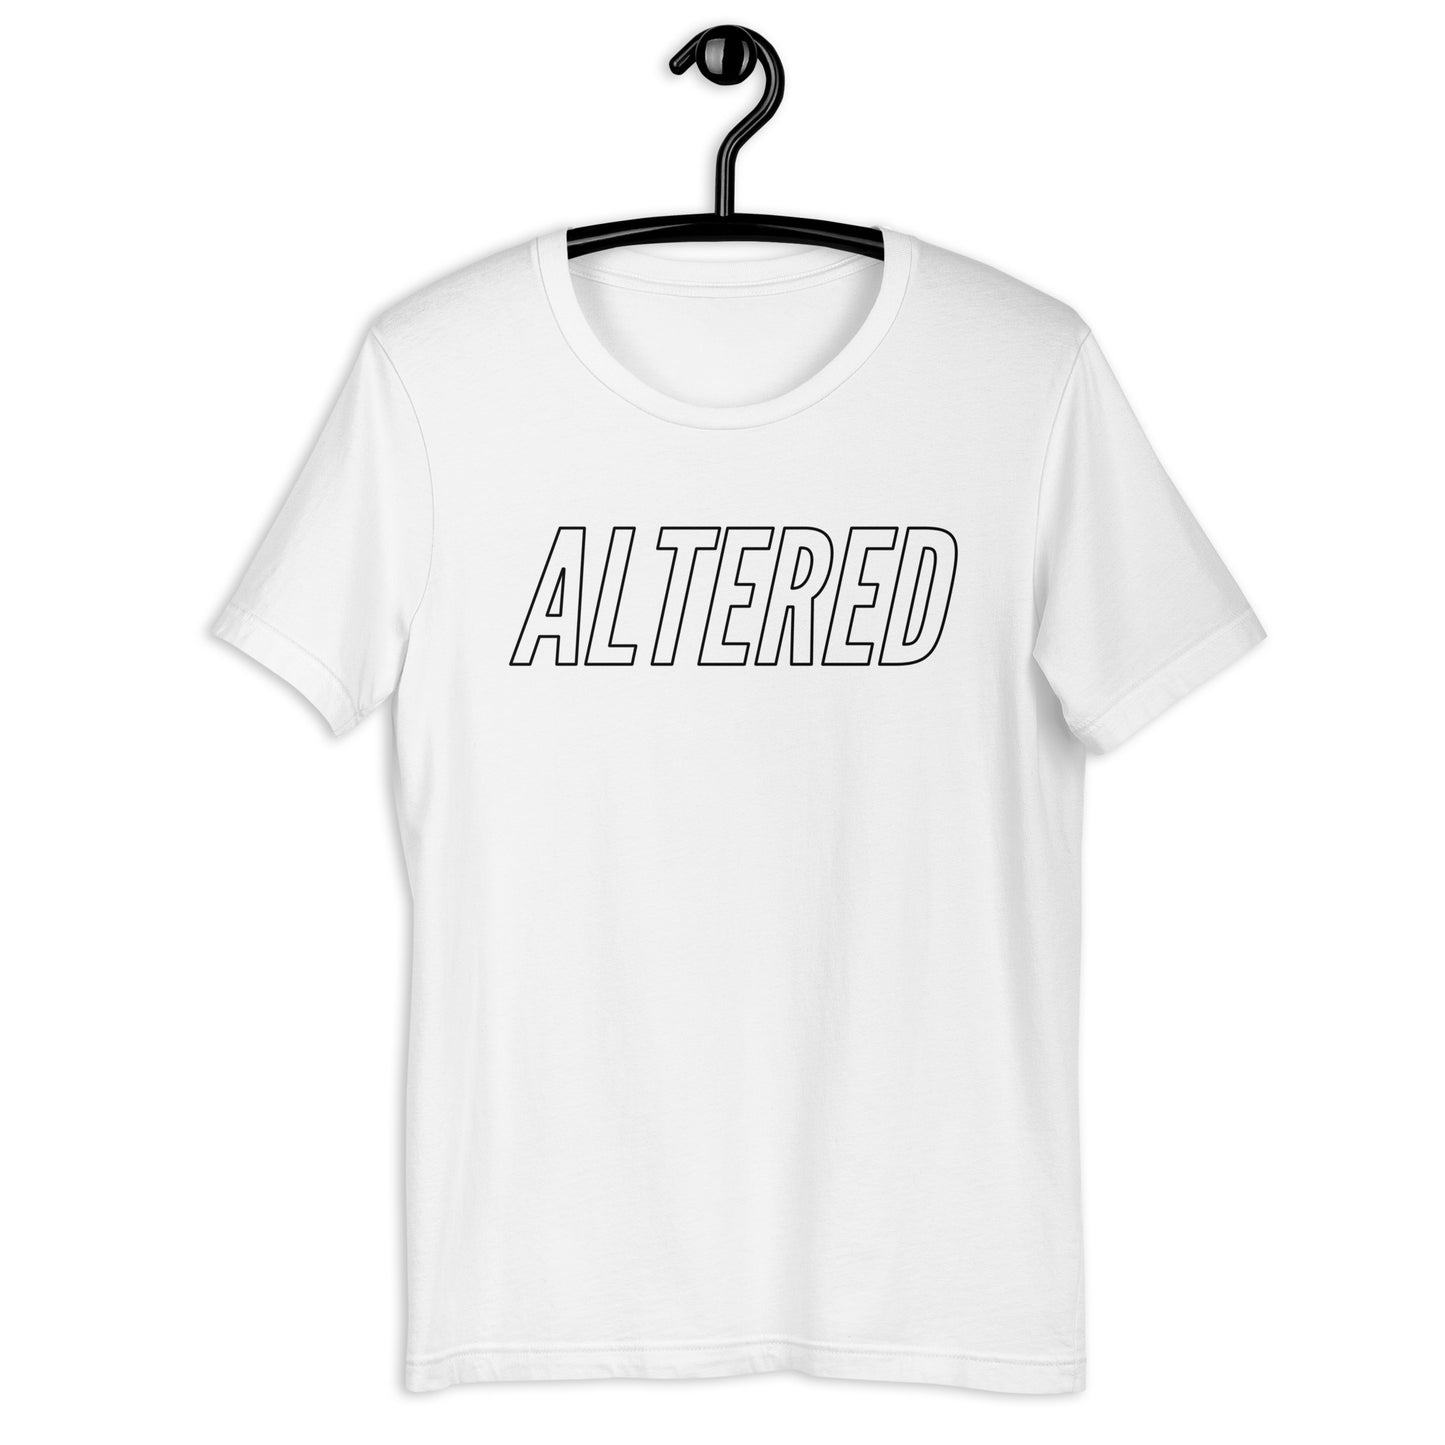 Altered Tee